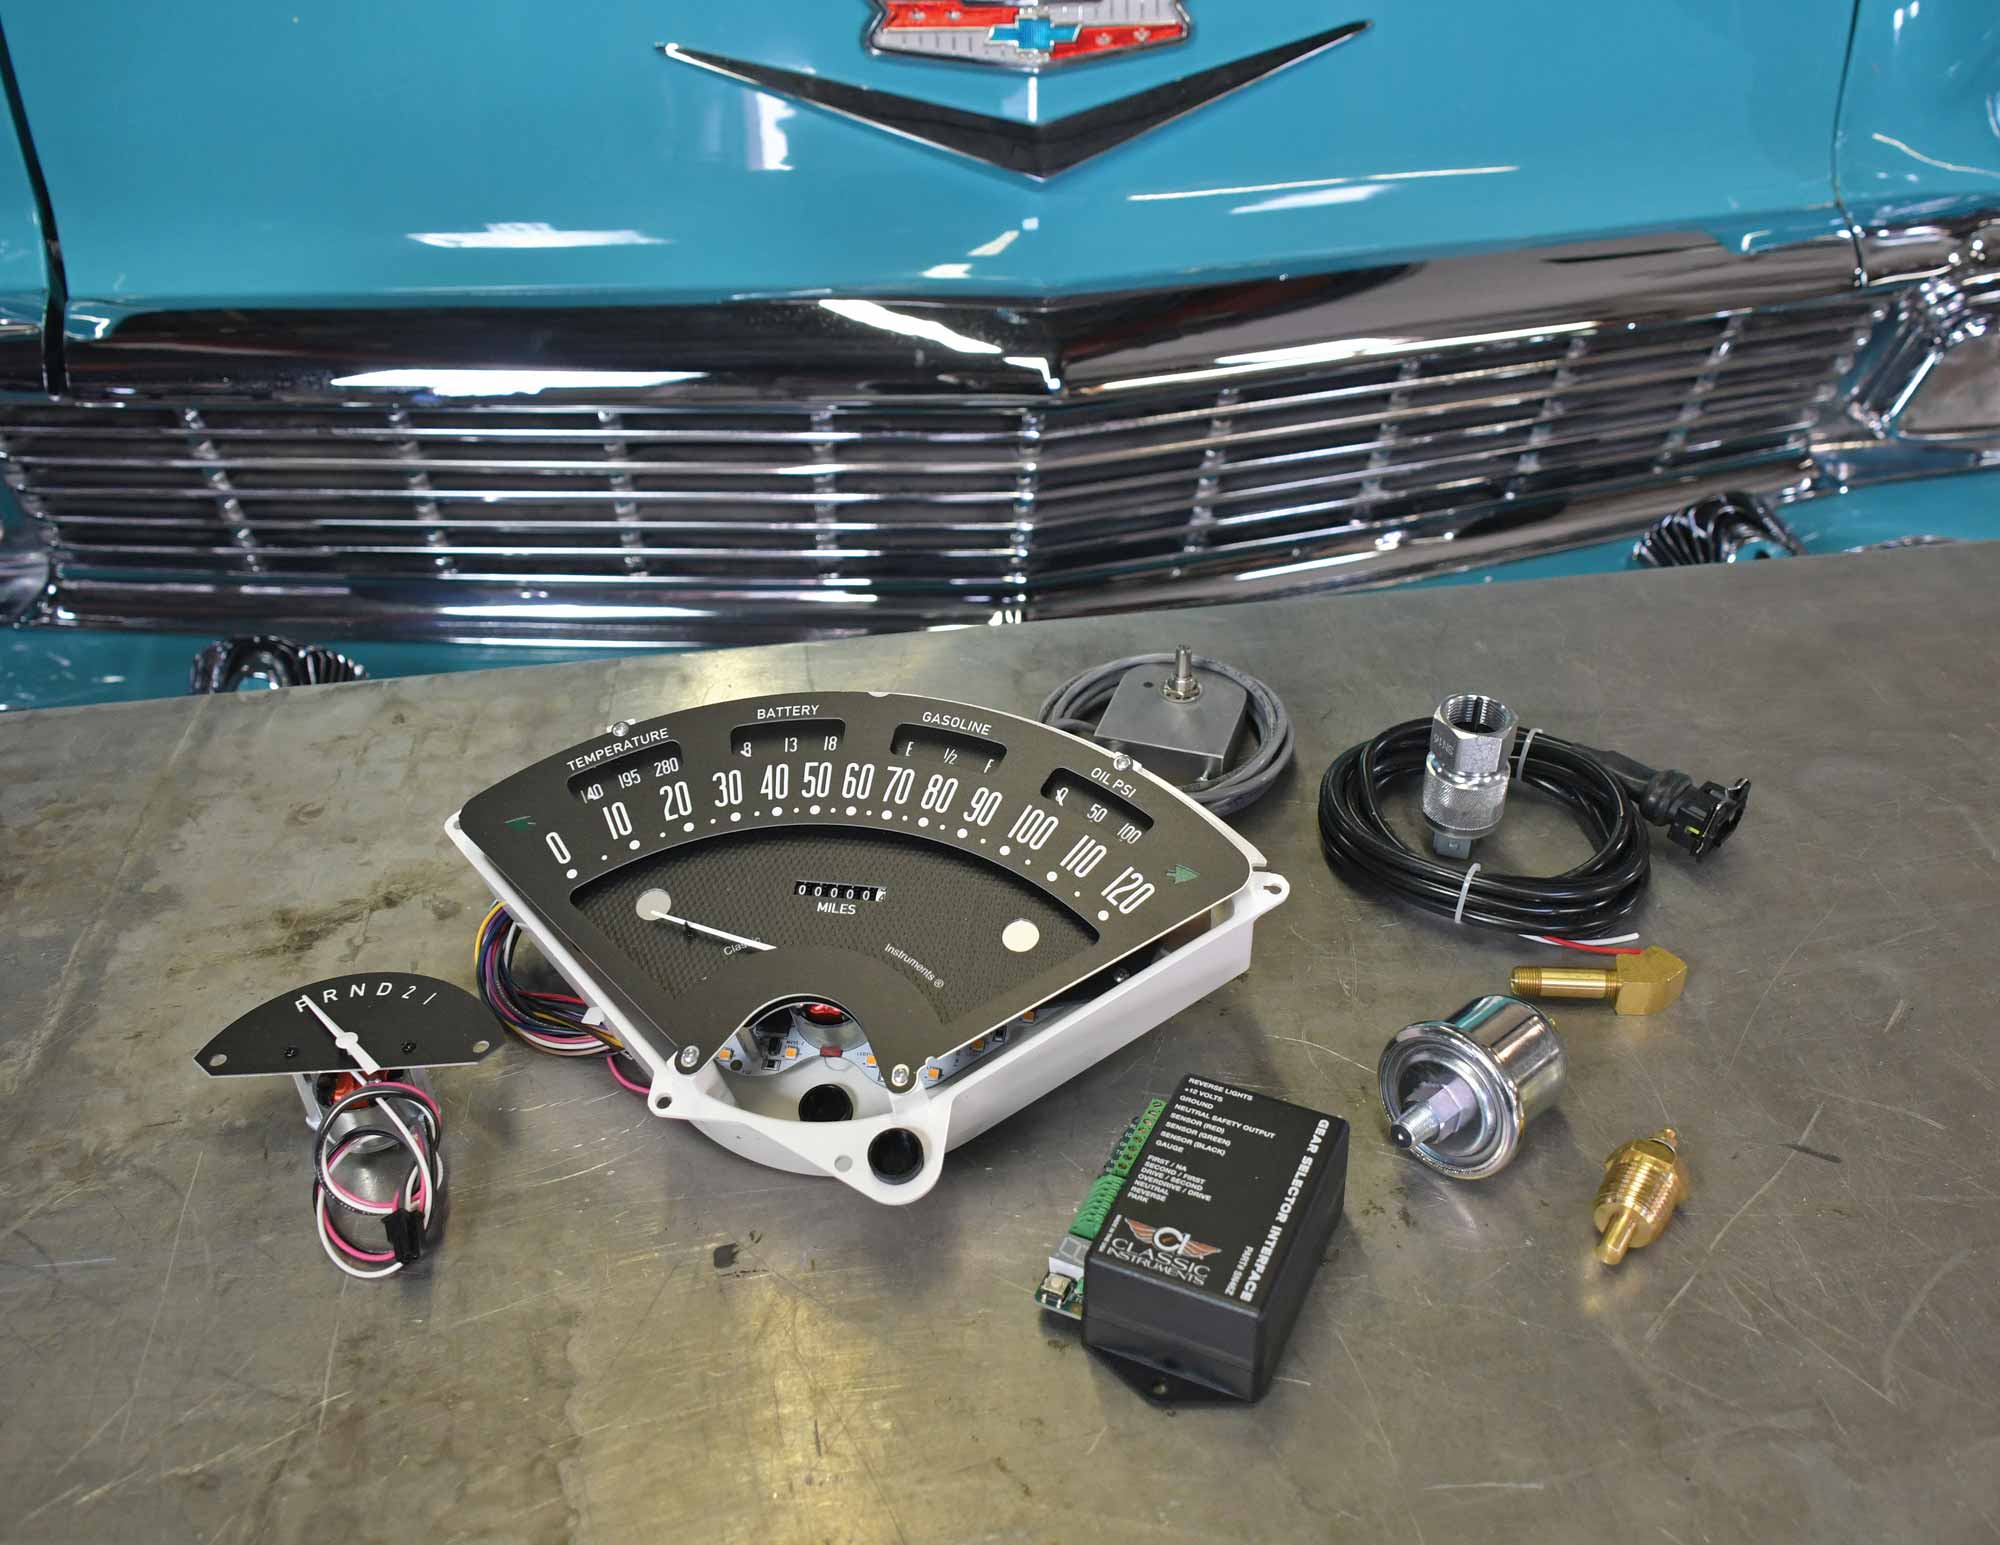 Parts of Classic Instruments' Bel Era III Dash on a table in front of the fender of a 1956 Chevrolet